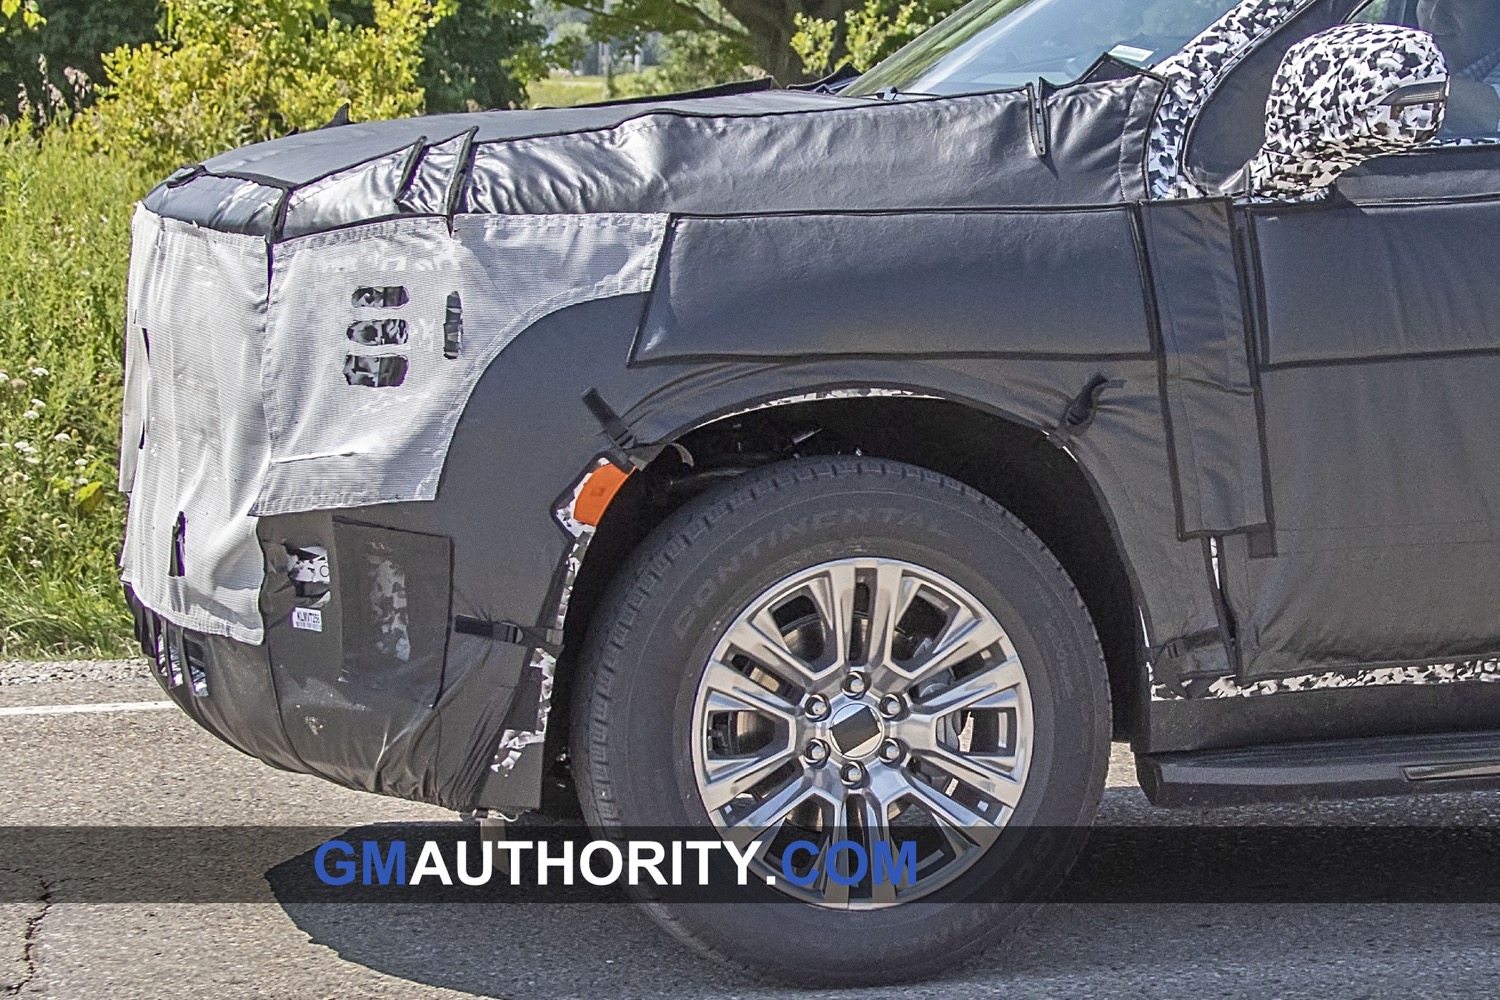 2021 Gmc Yukon Spied With Production Intent Headlamps Gm